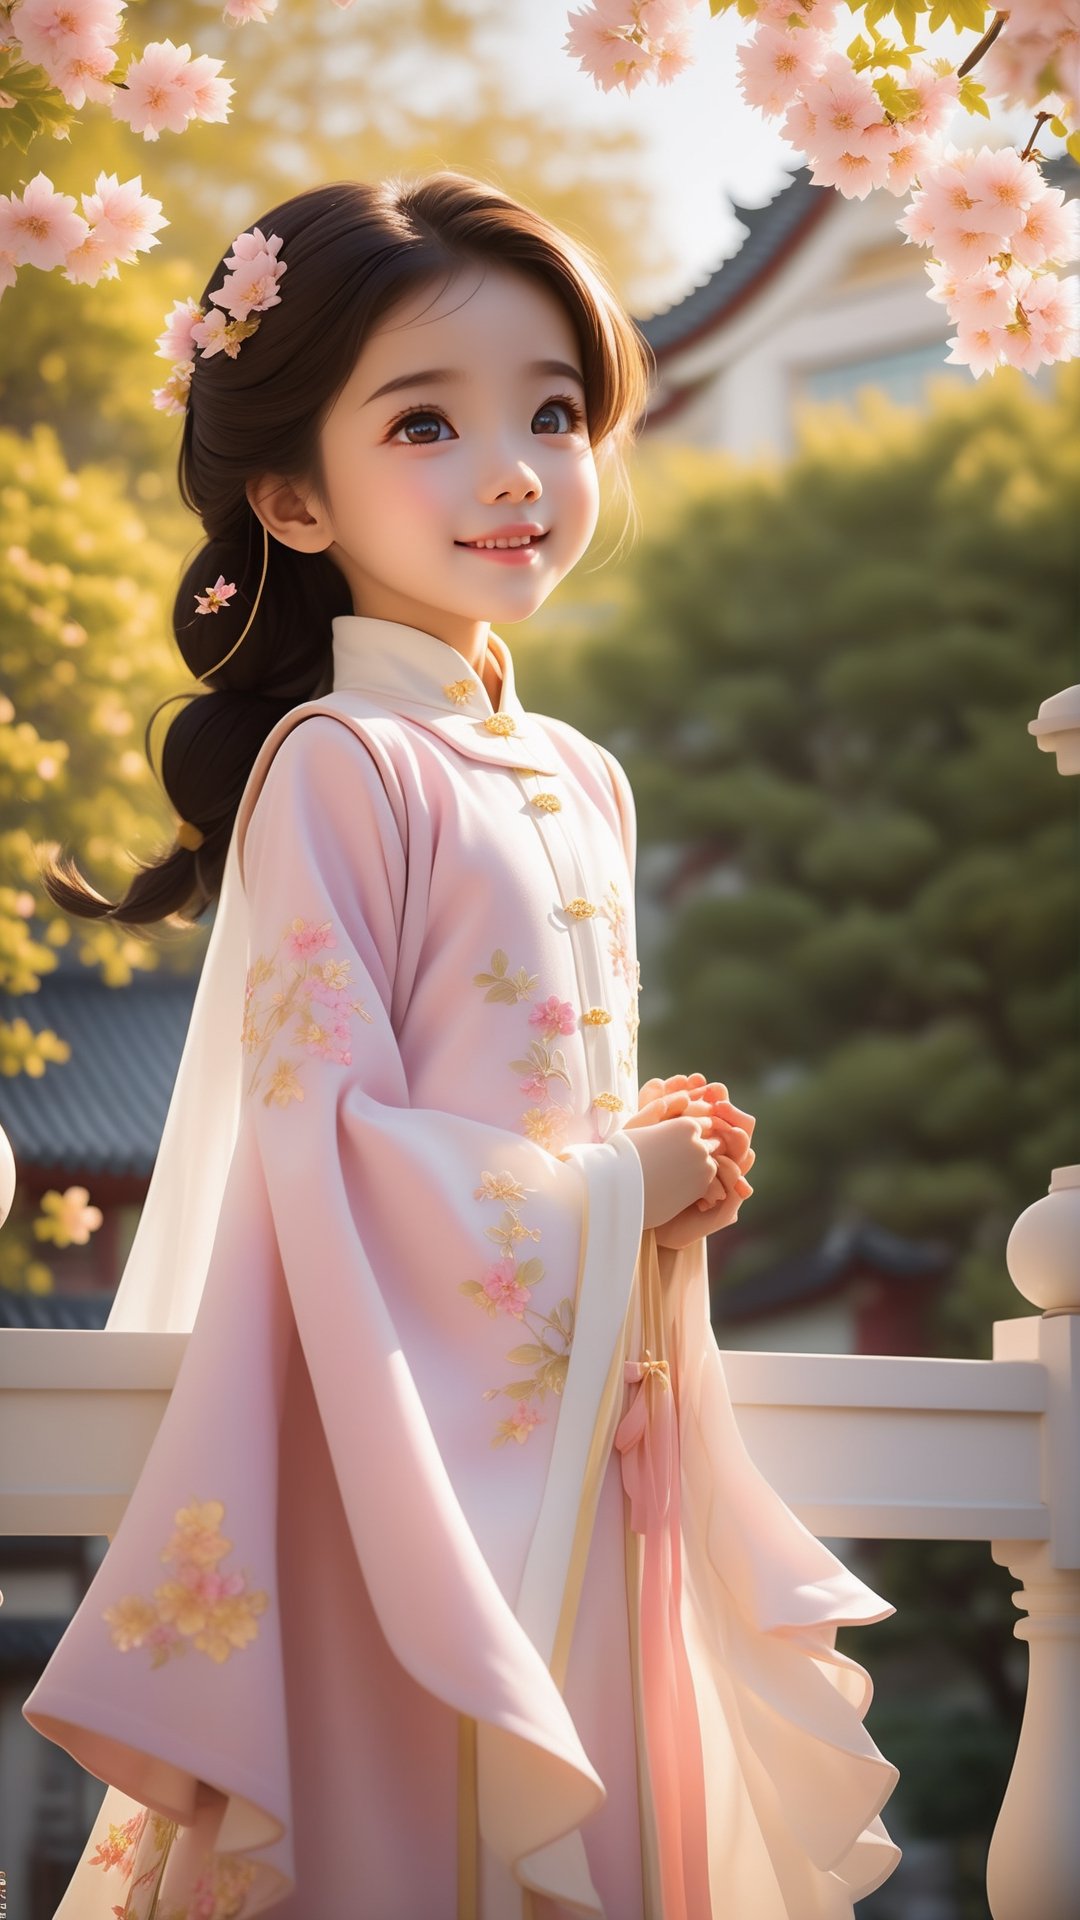 Pixar animated movie scene style, Chinese house style, in the morning light, pink and white yellow flowers bloom and maple tree bloom, sunray through the leaves, a beautiful and cute little girl with beautiful eyes, standing 
 on the railing, perfect face, smiling happily, 32k ultra high definition, Pixar movie scene style, realistic high quality Portrait photography, eternal beauty, the lantern behind her emits a soft light, beautiful and dreamy, the flowers are in bloom, and the light bokeh serves as the background.